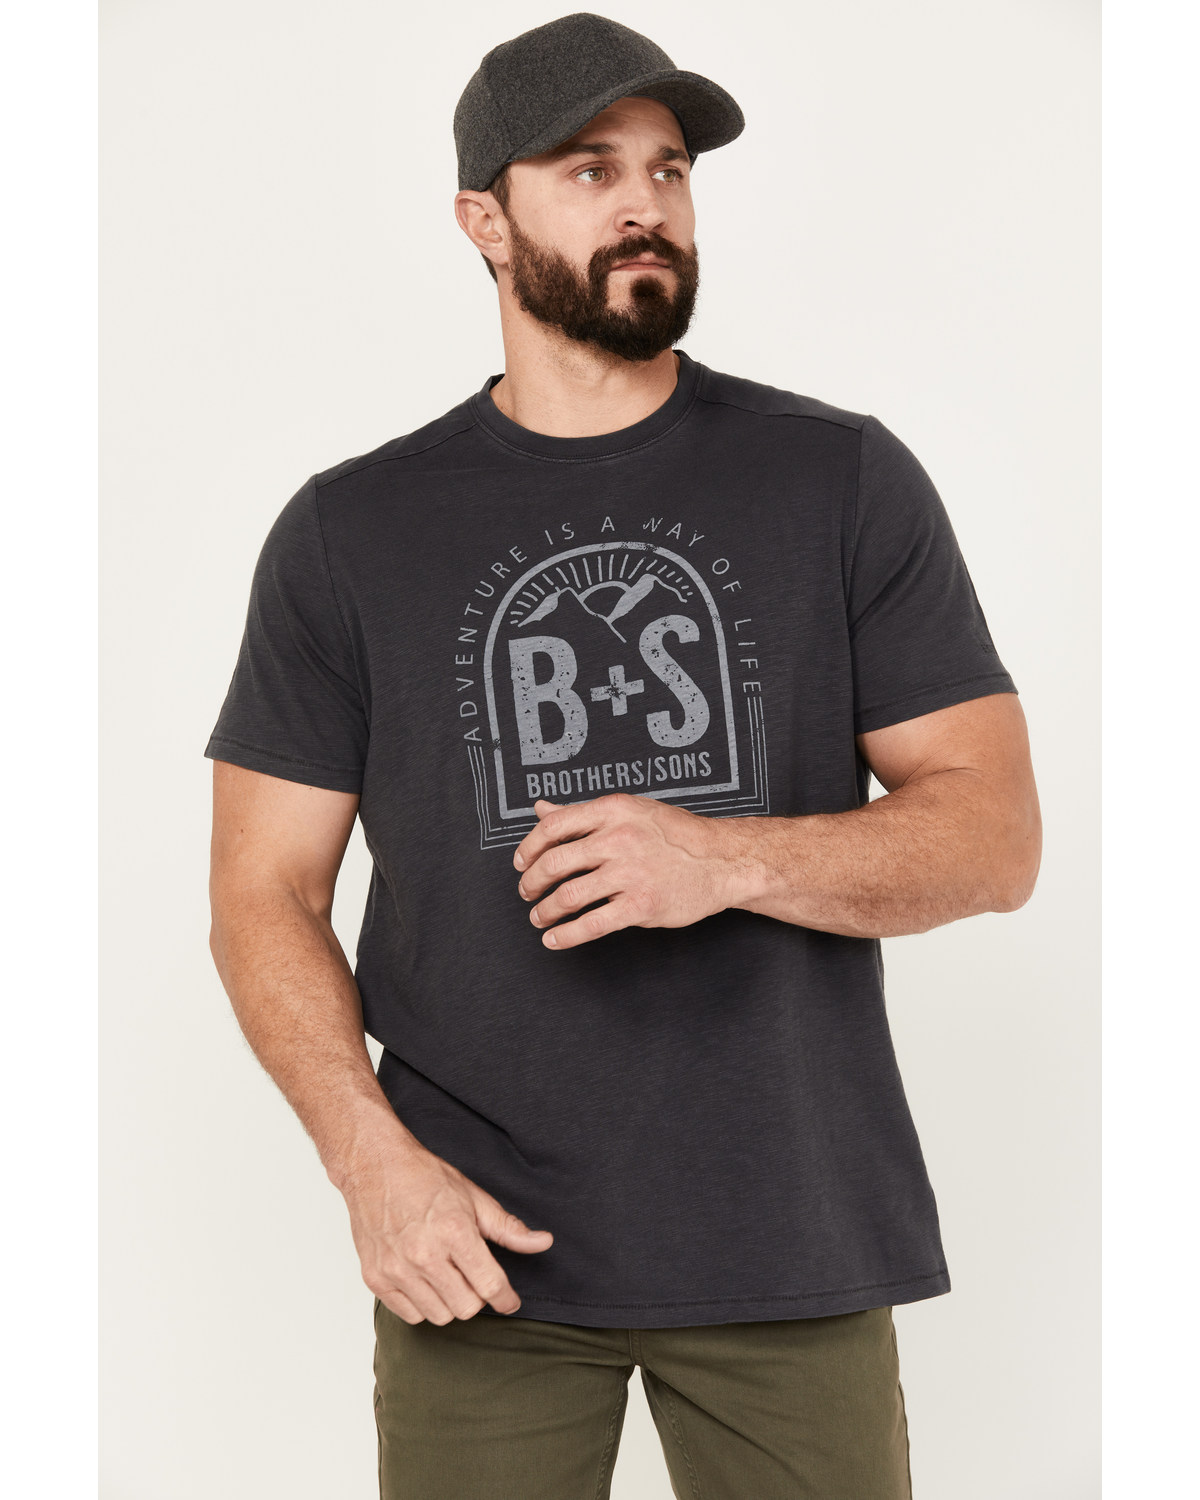 Brothers and Sons Men's Adventure Short Sleeve Graphic T-Shirt